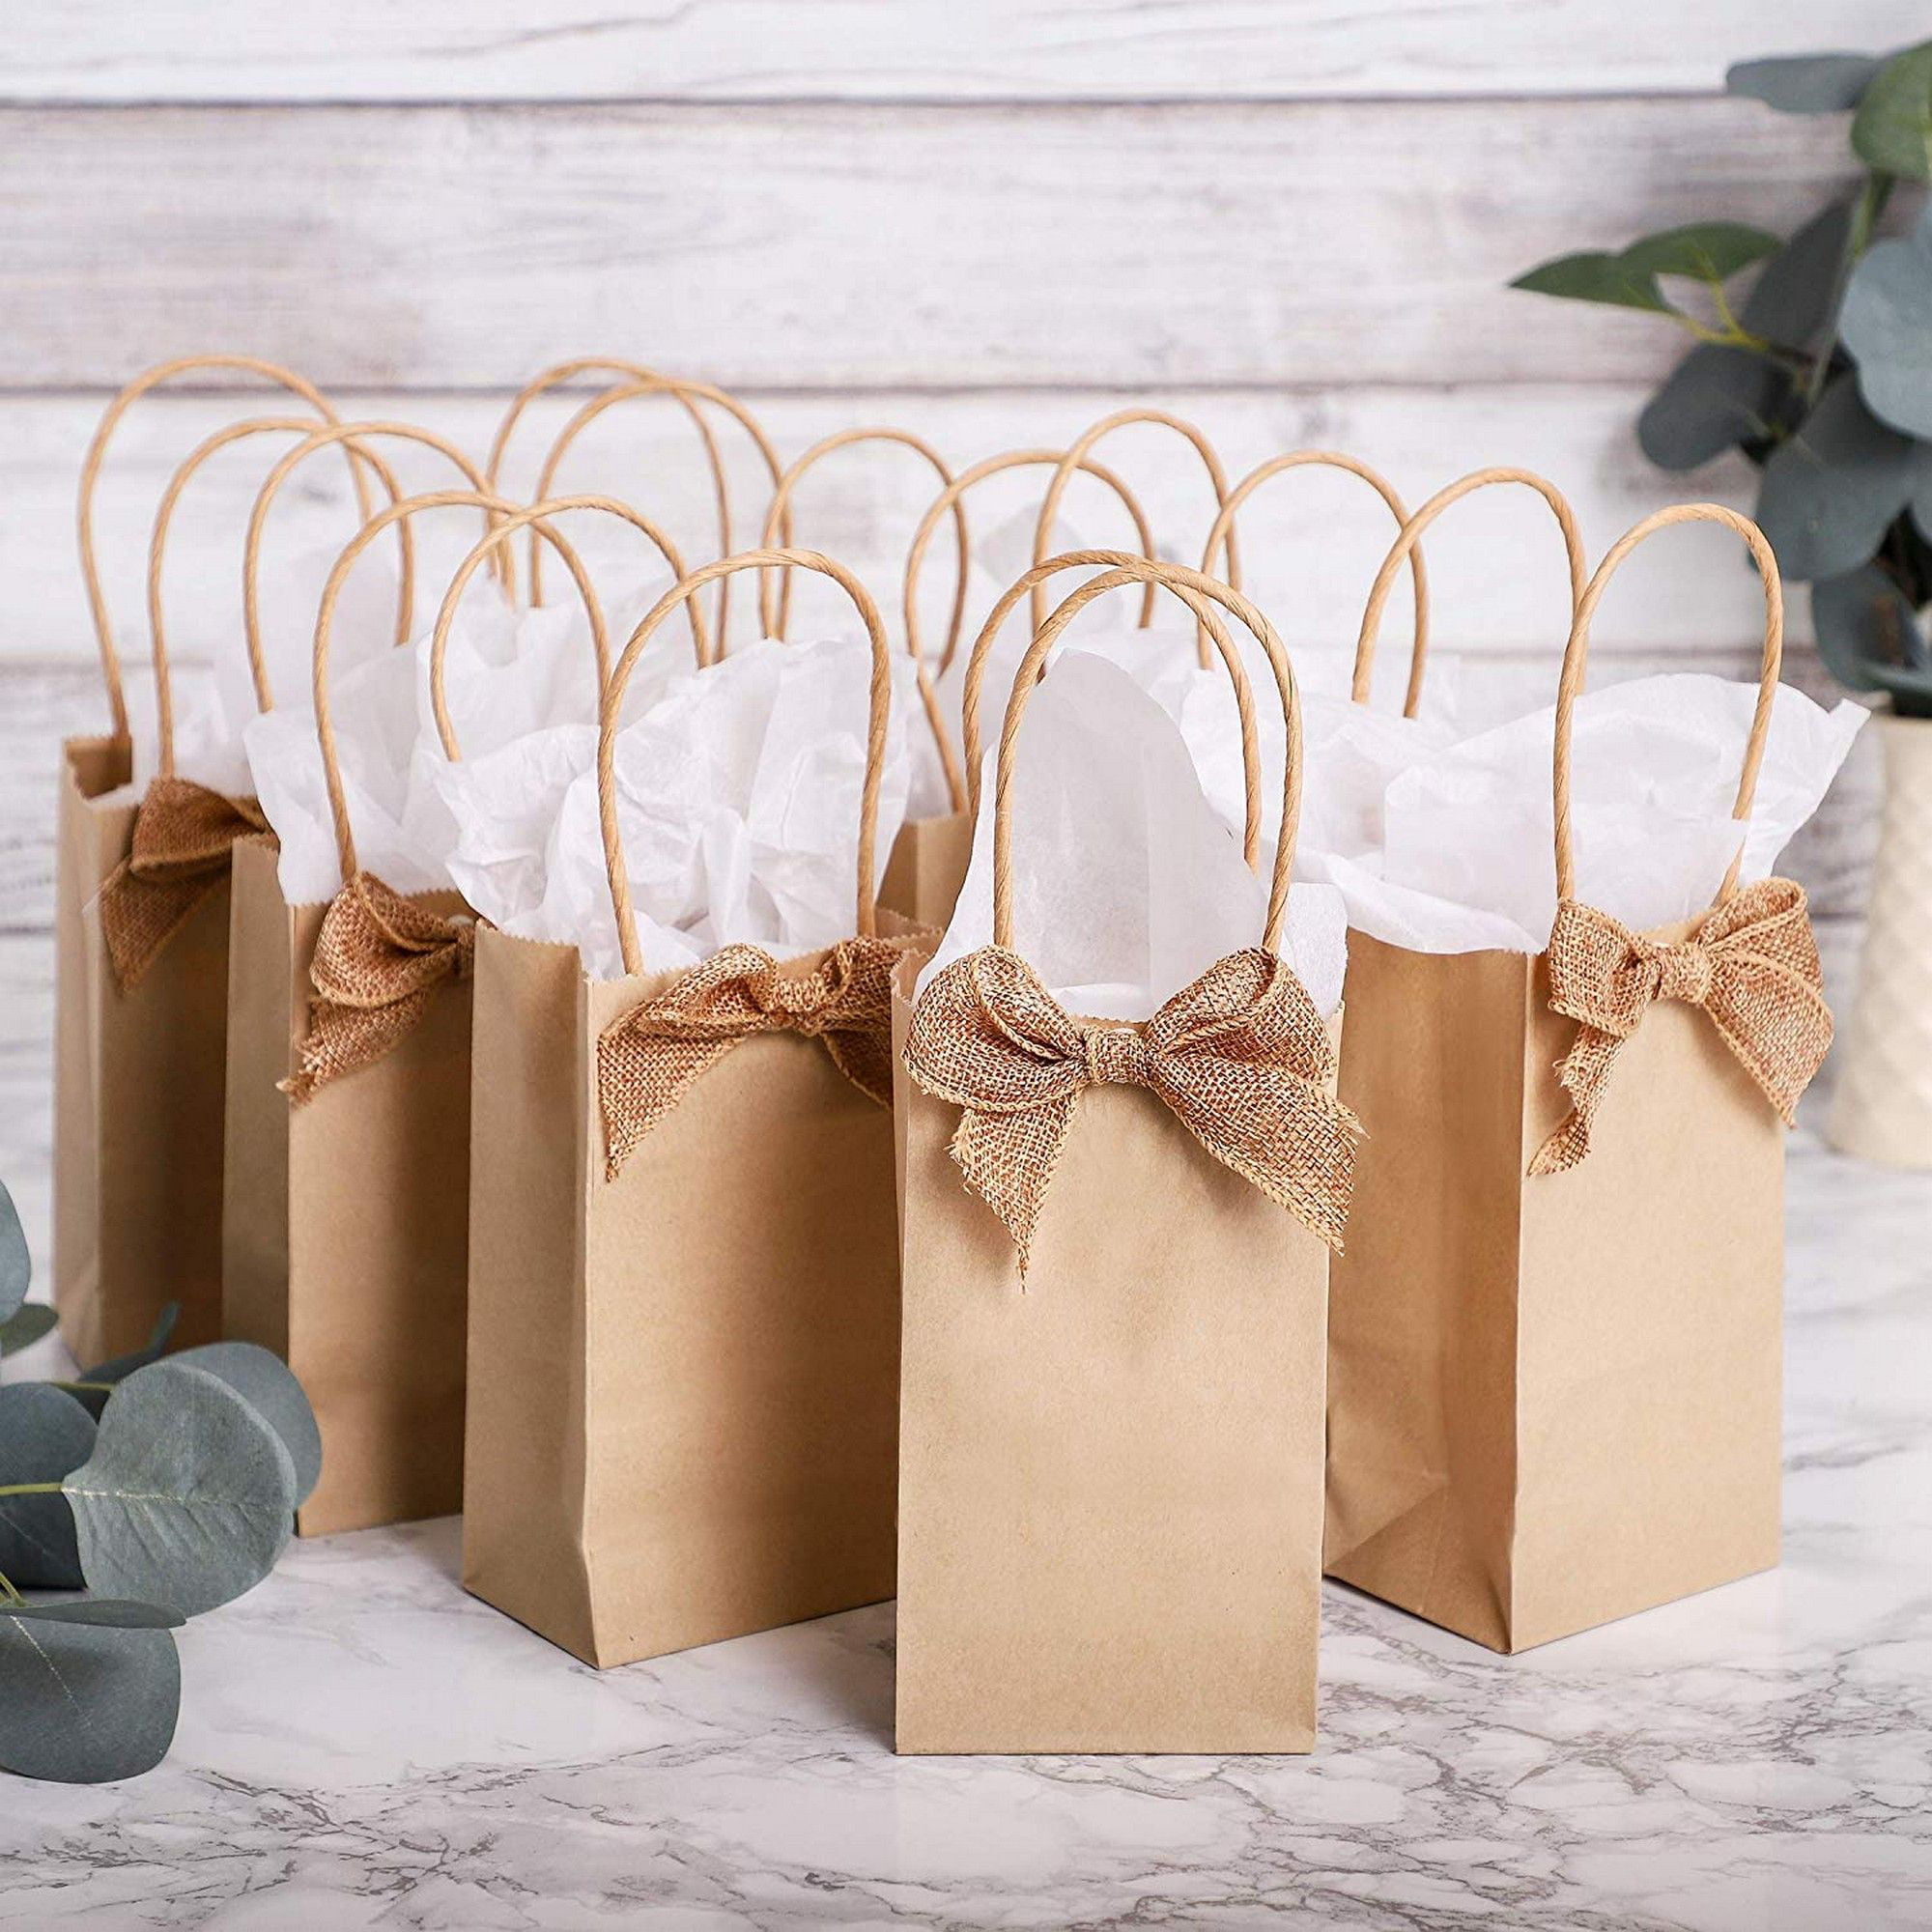 Brown Kraft Paper Gift Bags Bulk with Handles 50Pc Ideal for Shopping, 